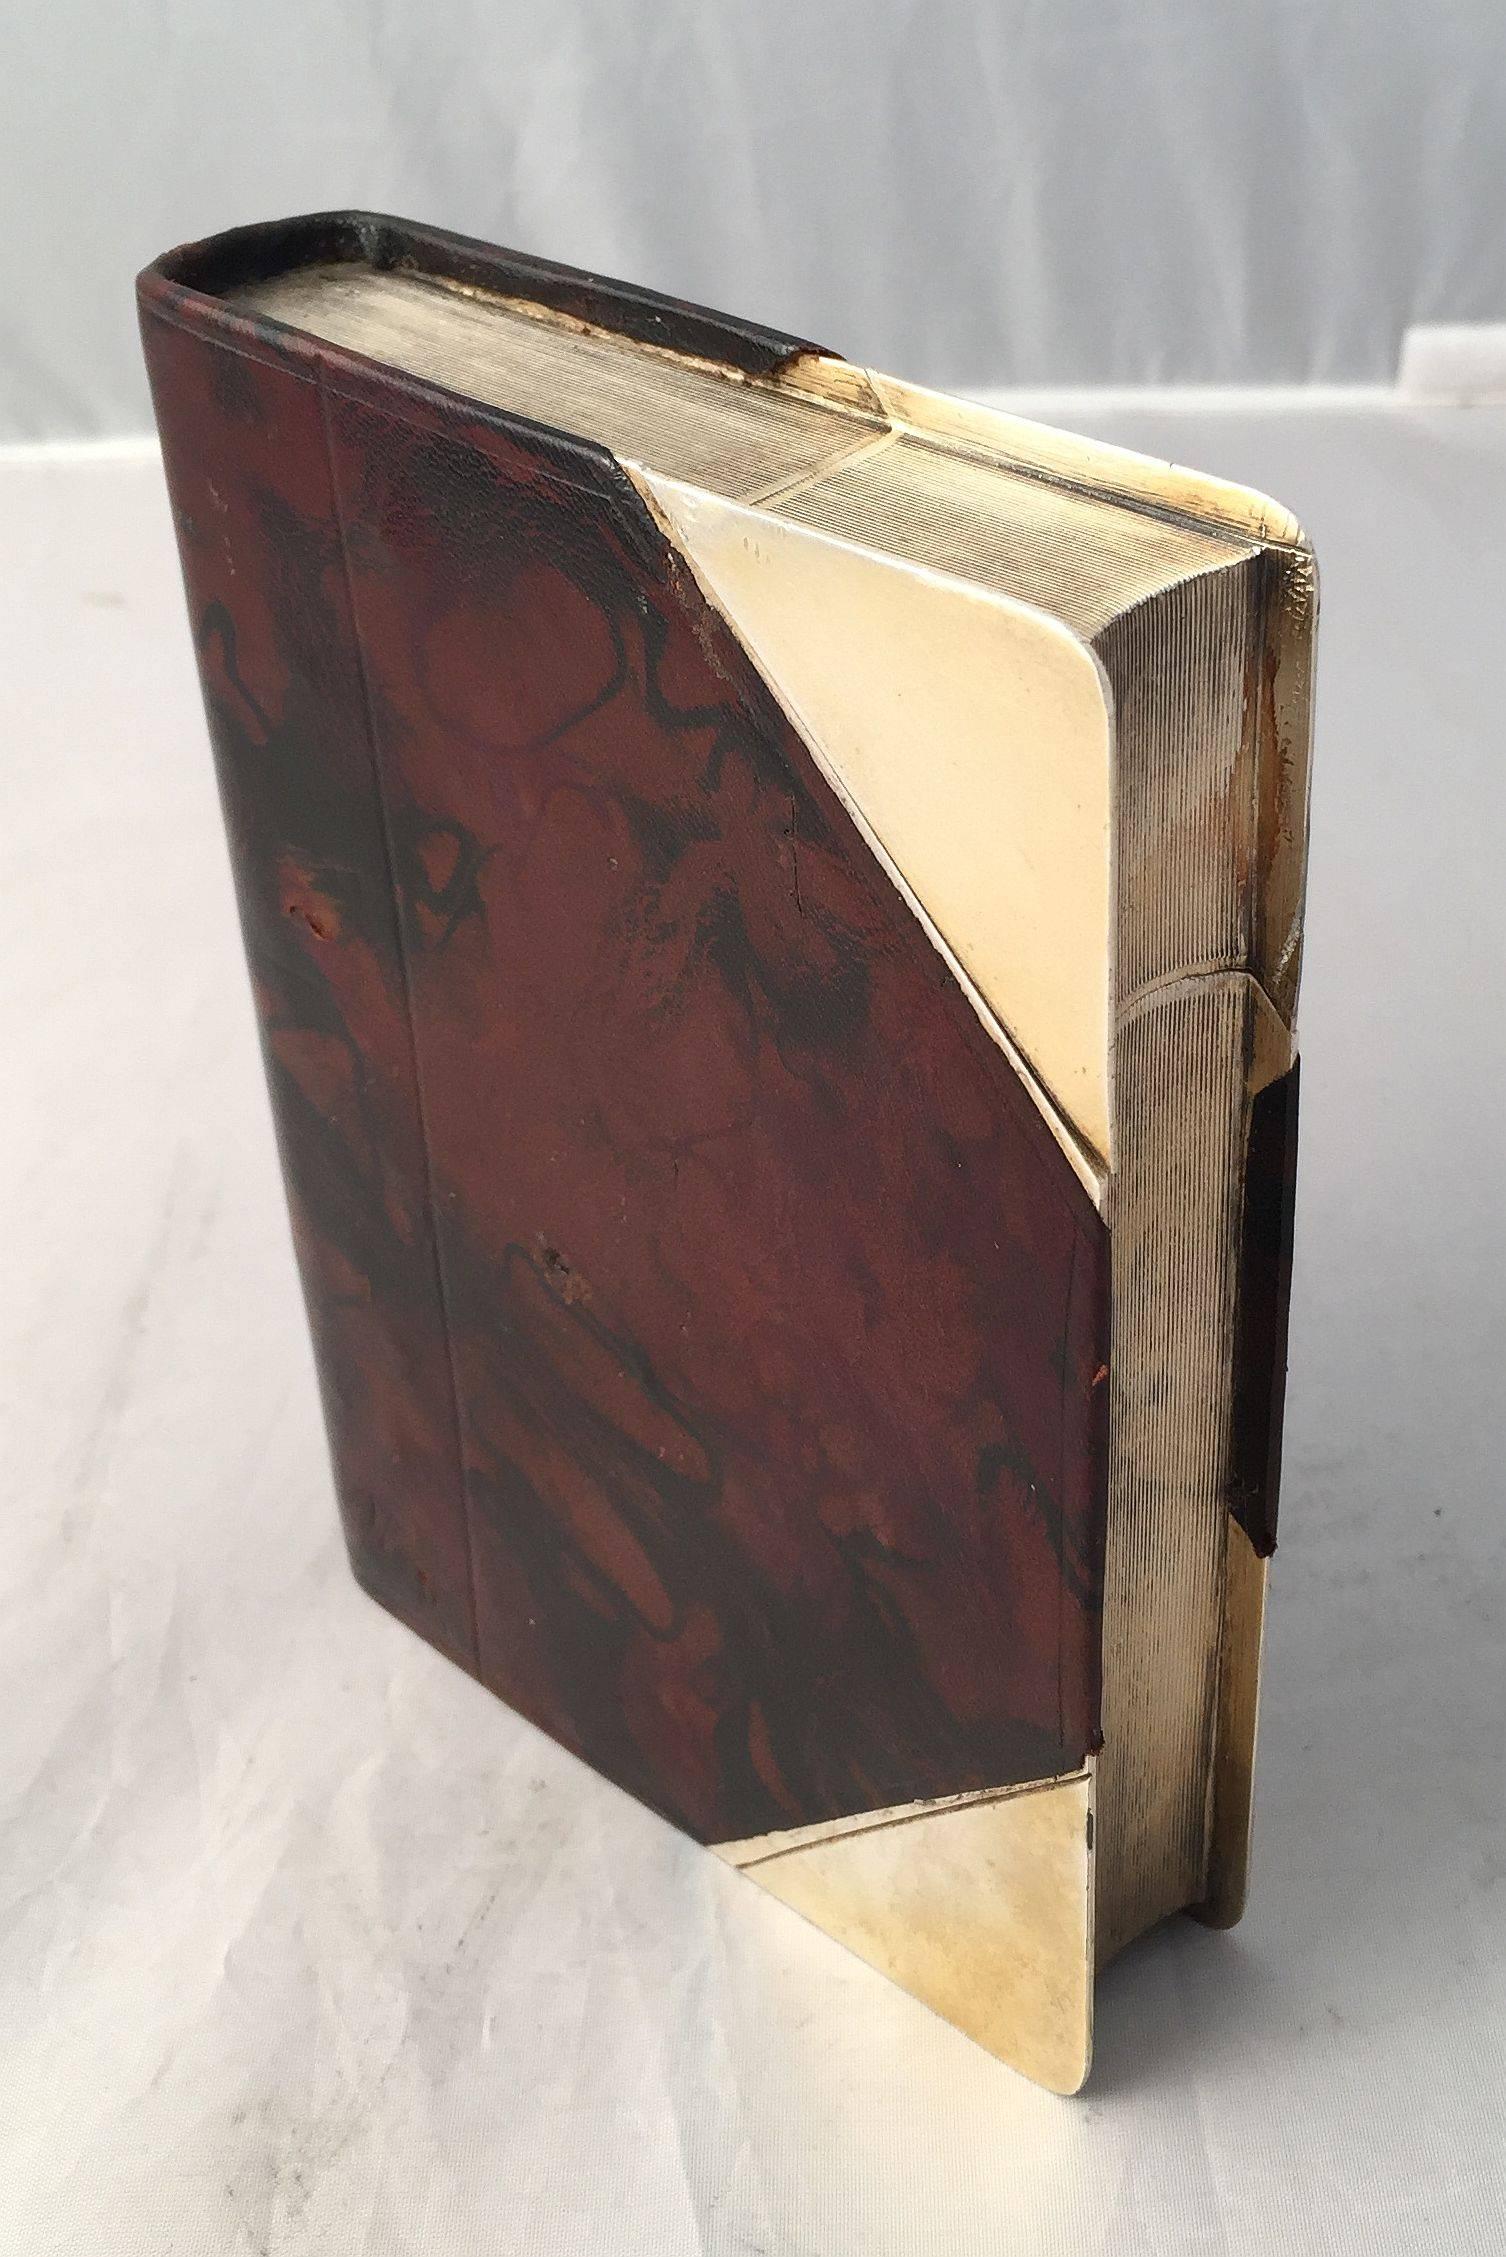 A rare English drinks or liquor flask, by James Dixon and Sons, Ltd. of Sheffield, featuring a book-shaped body of leather over gilt metal, holding eight ounces, with a removable twist-off corner that functions as the flask cap. 
The binding in